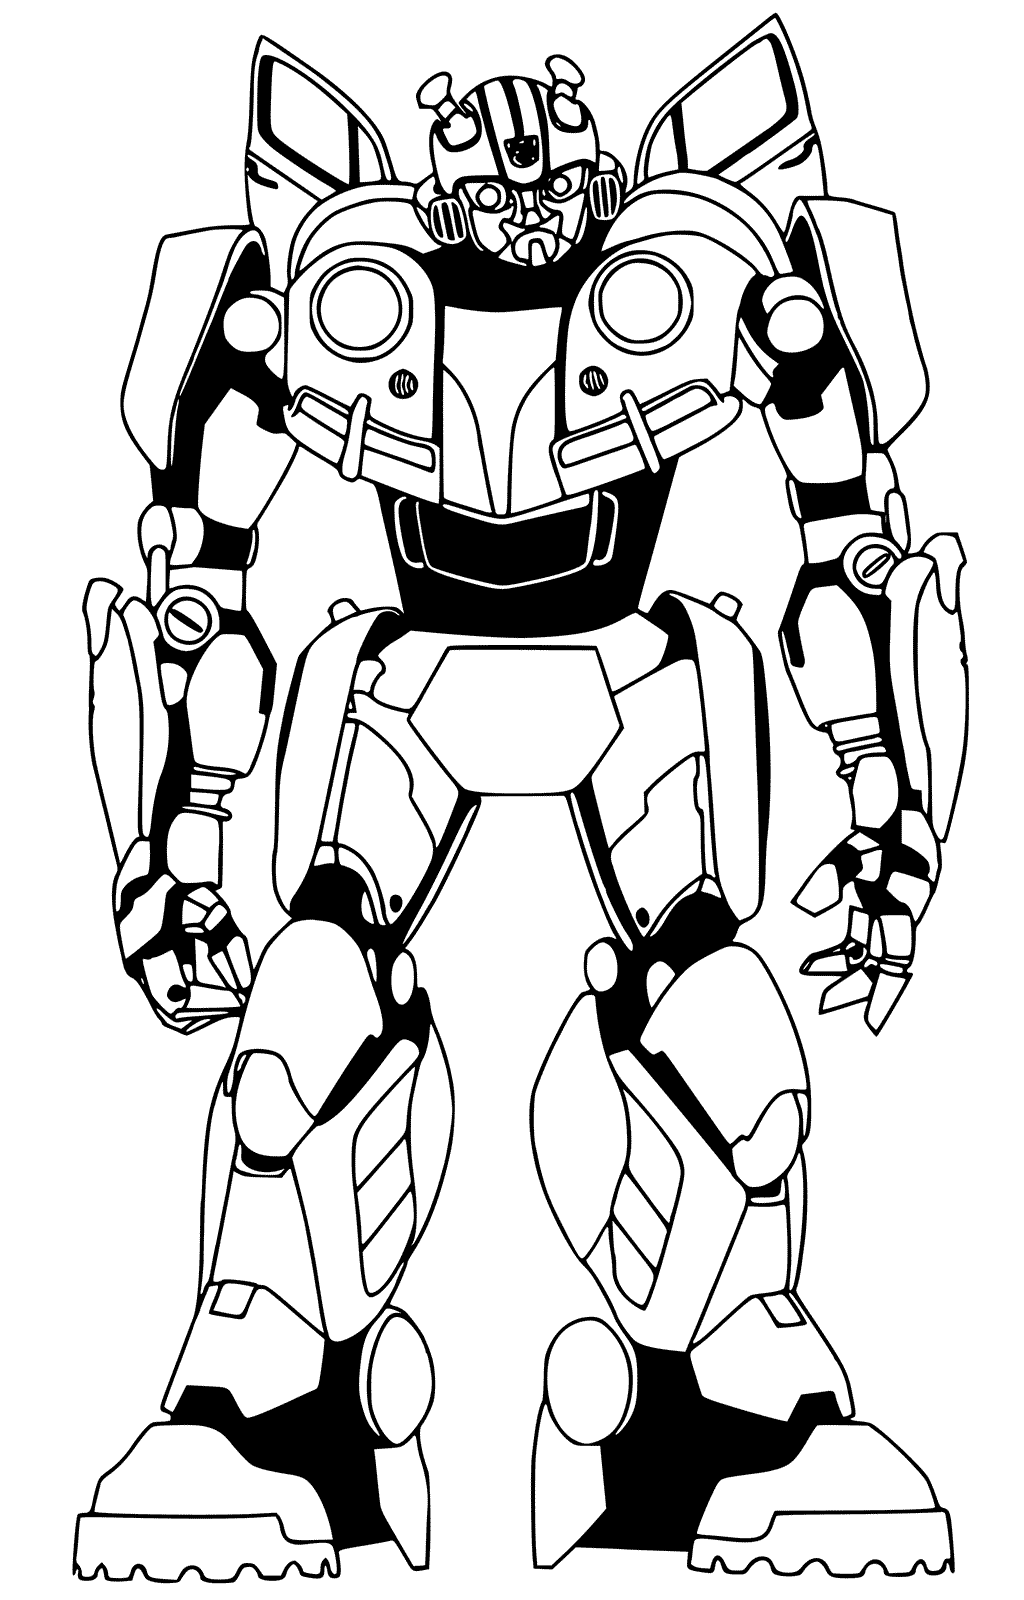 bumblebee-coloring-page-coloring-page-for-kids-coloring-home